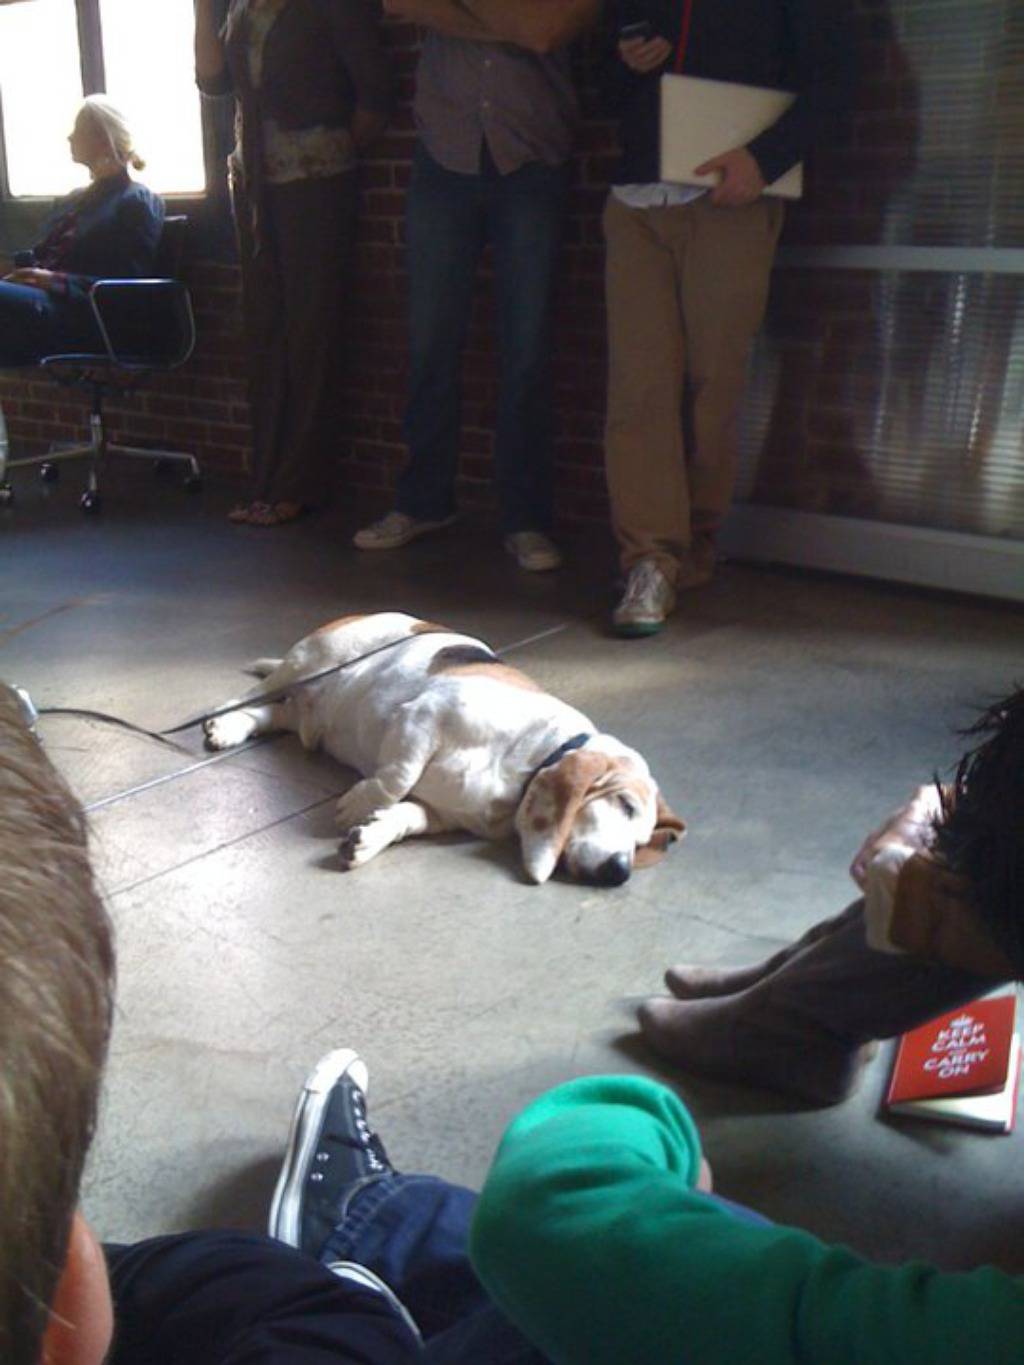 Facebook/George, the Very Tired Basset Hound